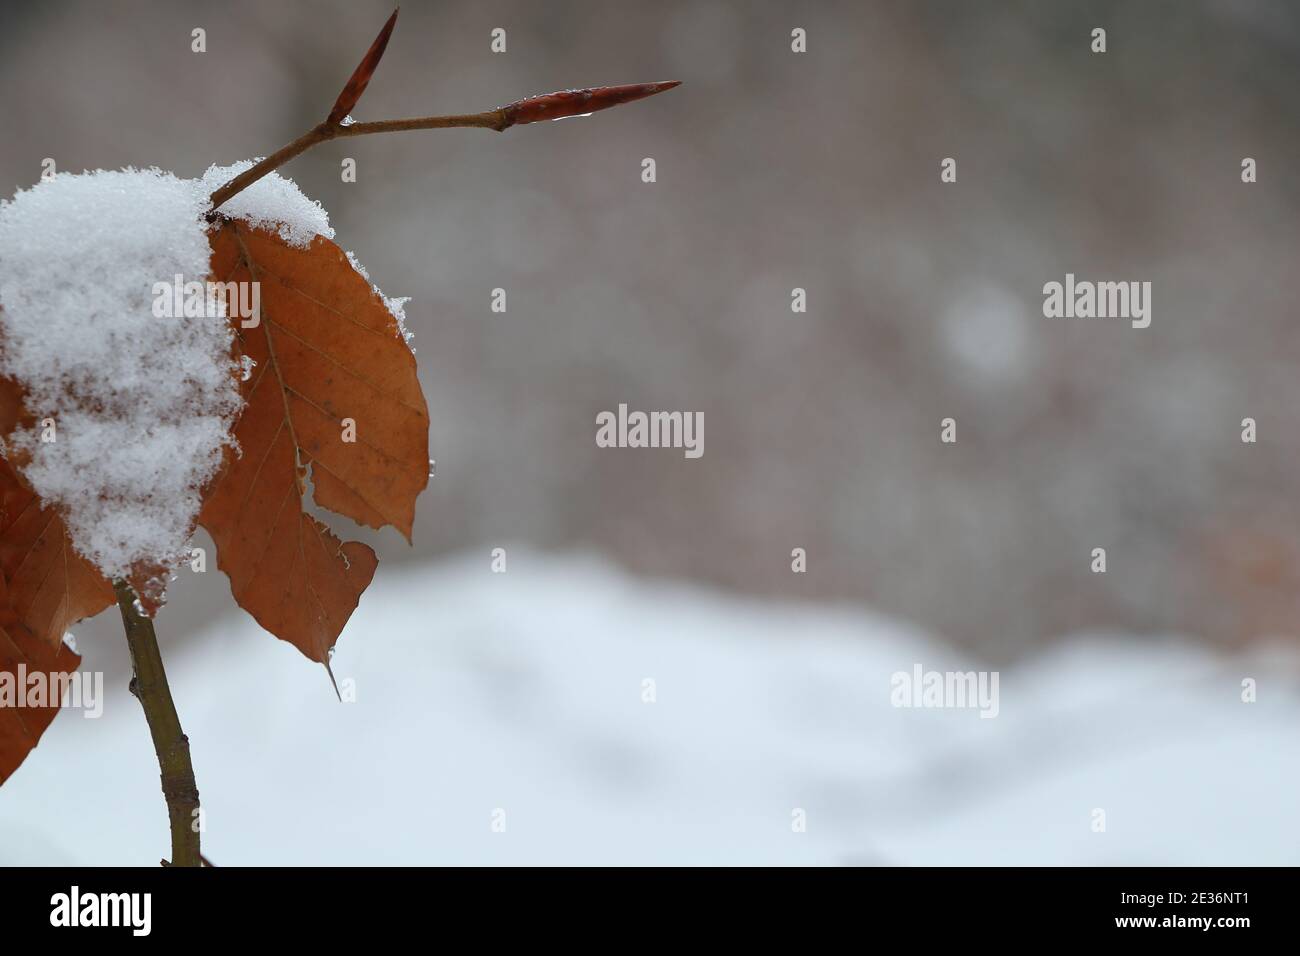 close up of twig with leaves in snowy landscape Stock Photo